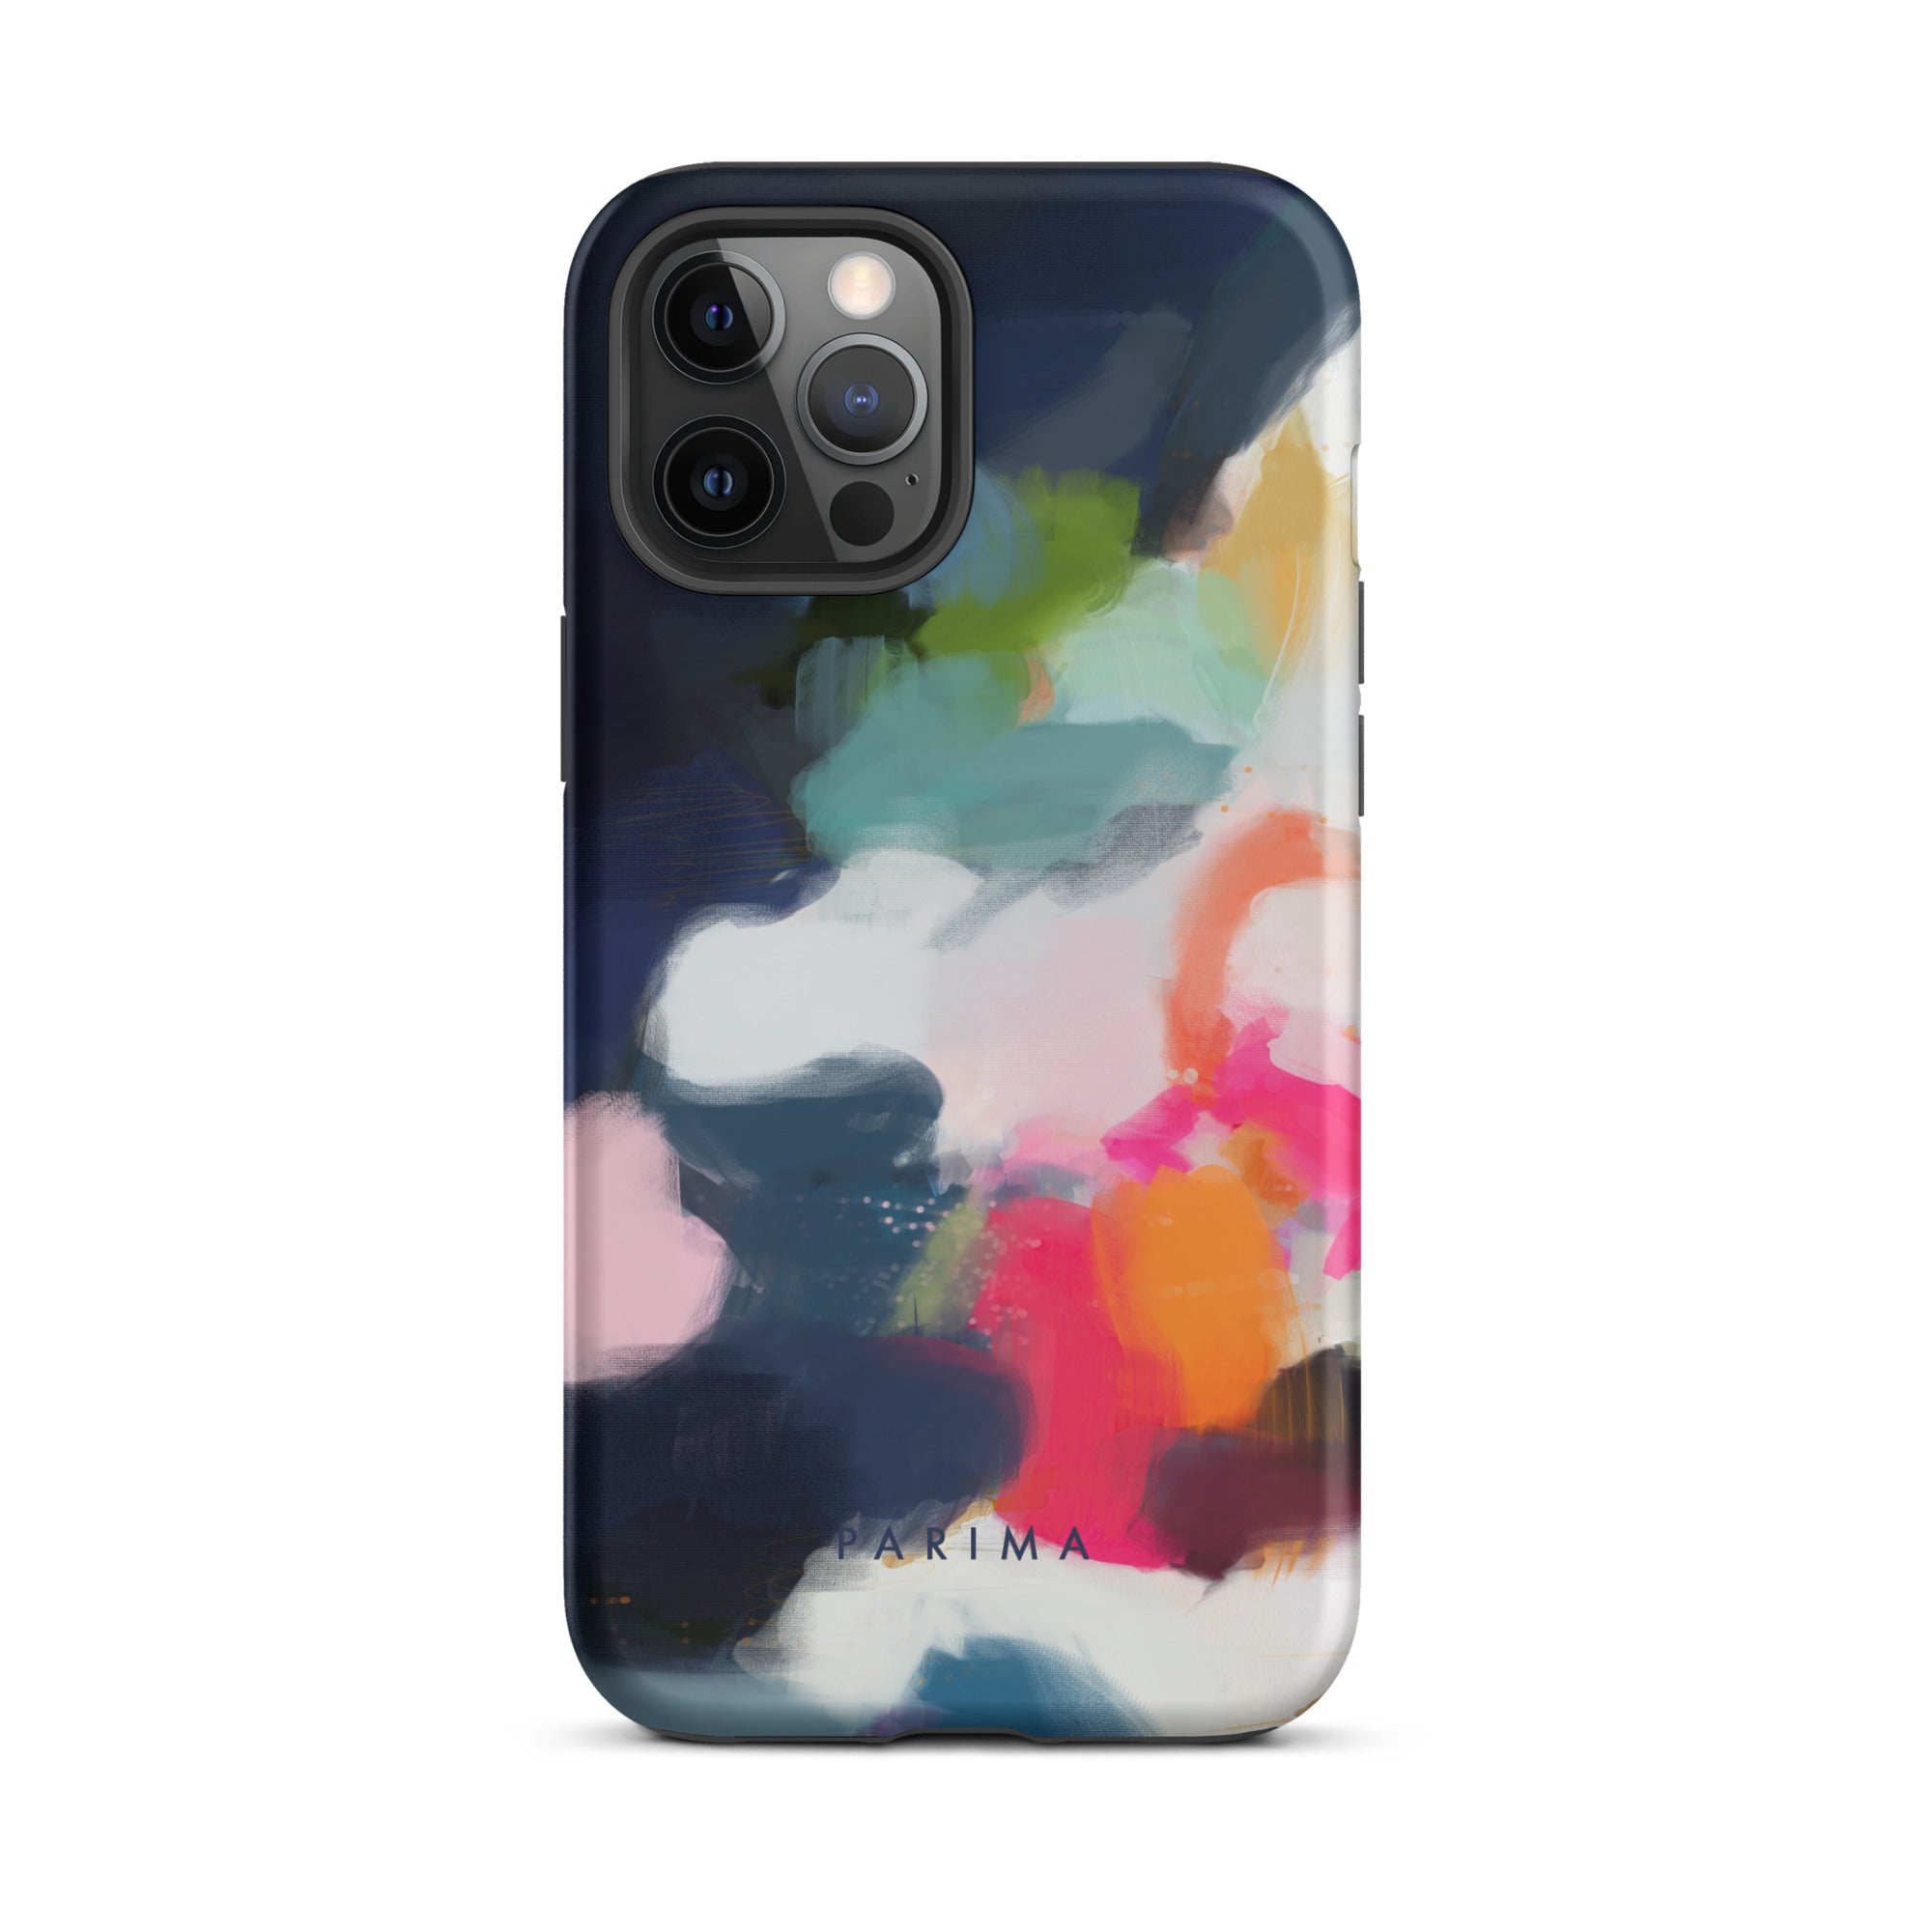 Eliza, pink and blue abstract art - iPhone 12 Pro Max tough case by Parima Studio